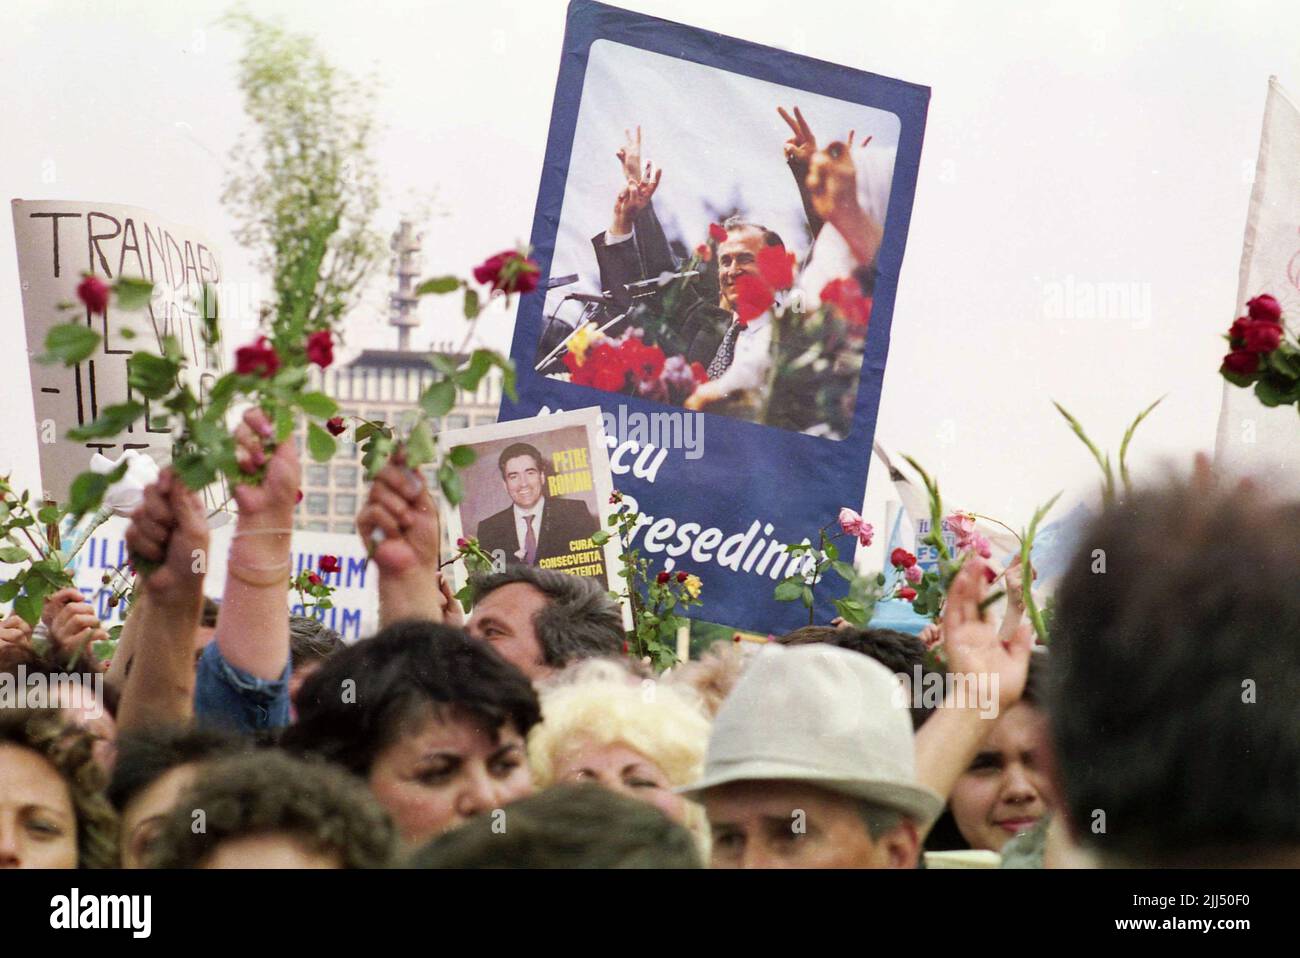 Bucharest, Romania, May 1990. Crowd attending a political rally organized by the National Salvation Front (F.S.N.) before the first democratic elections after the fall of communism. Stock Photo